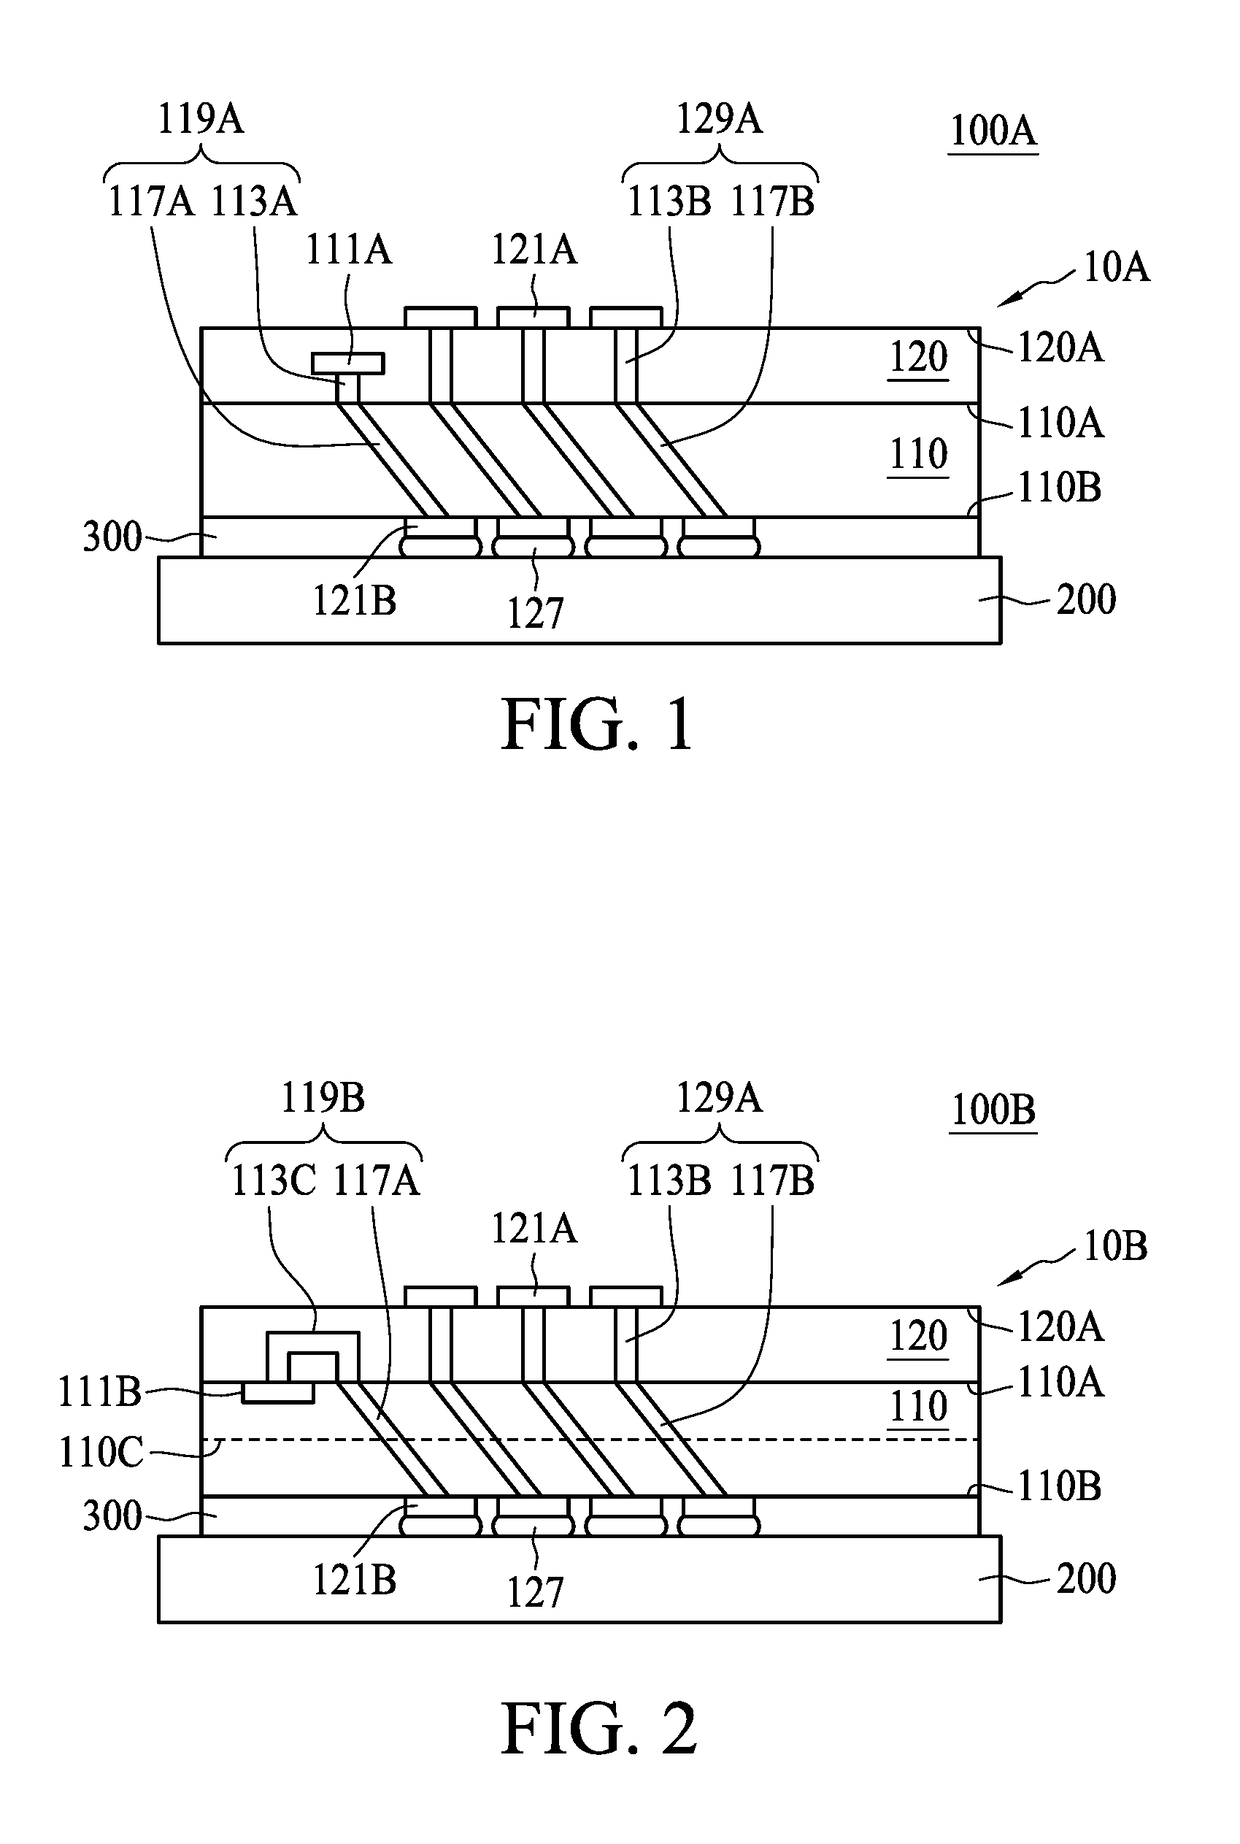 Chip package having tilted through silicon via